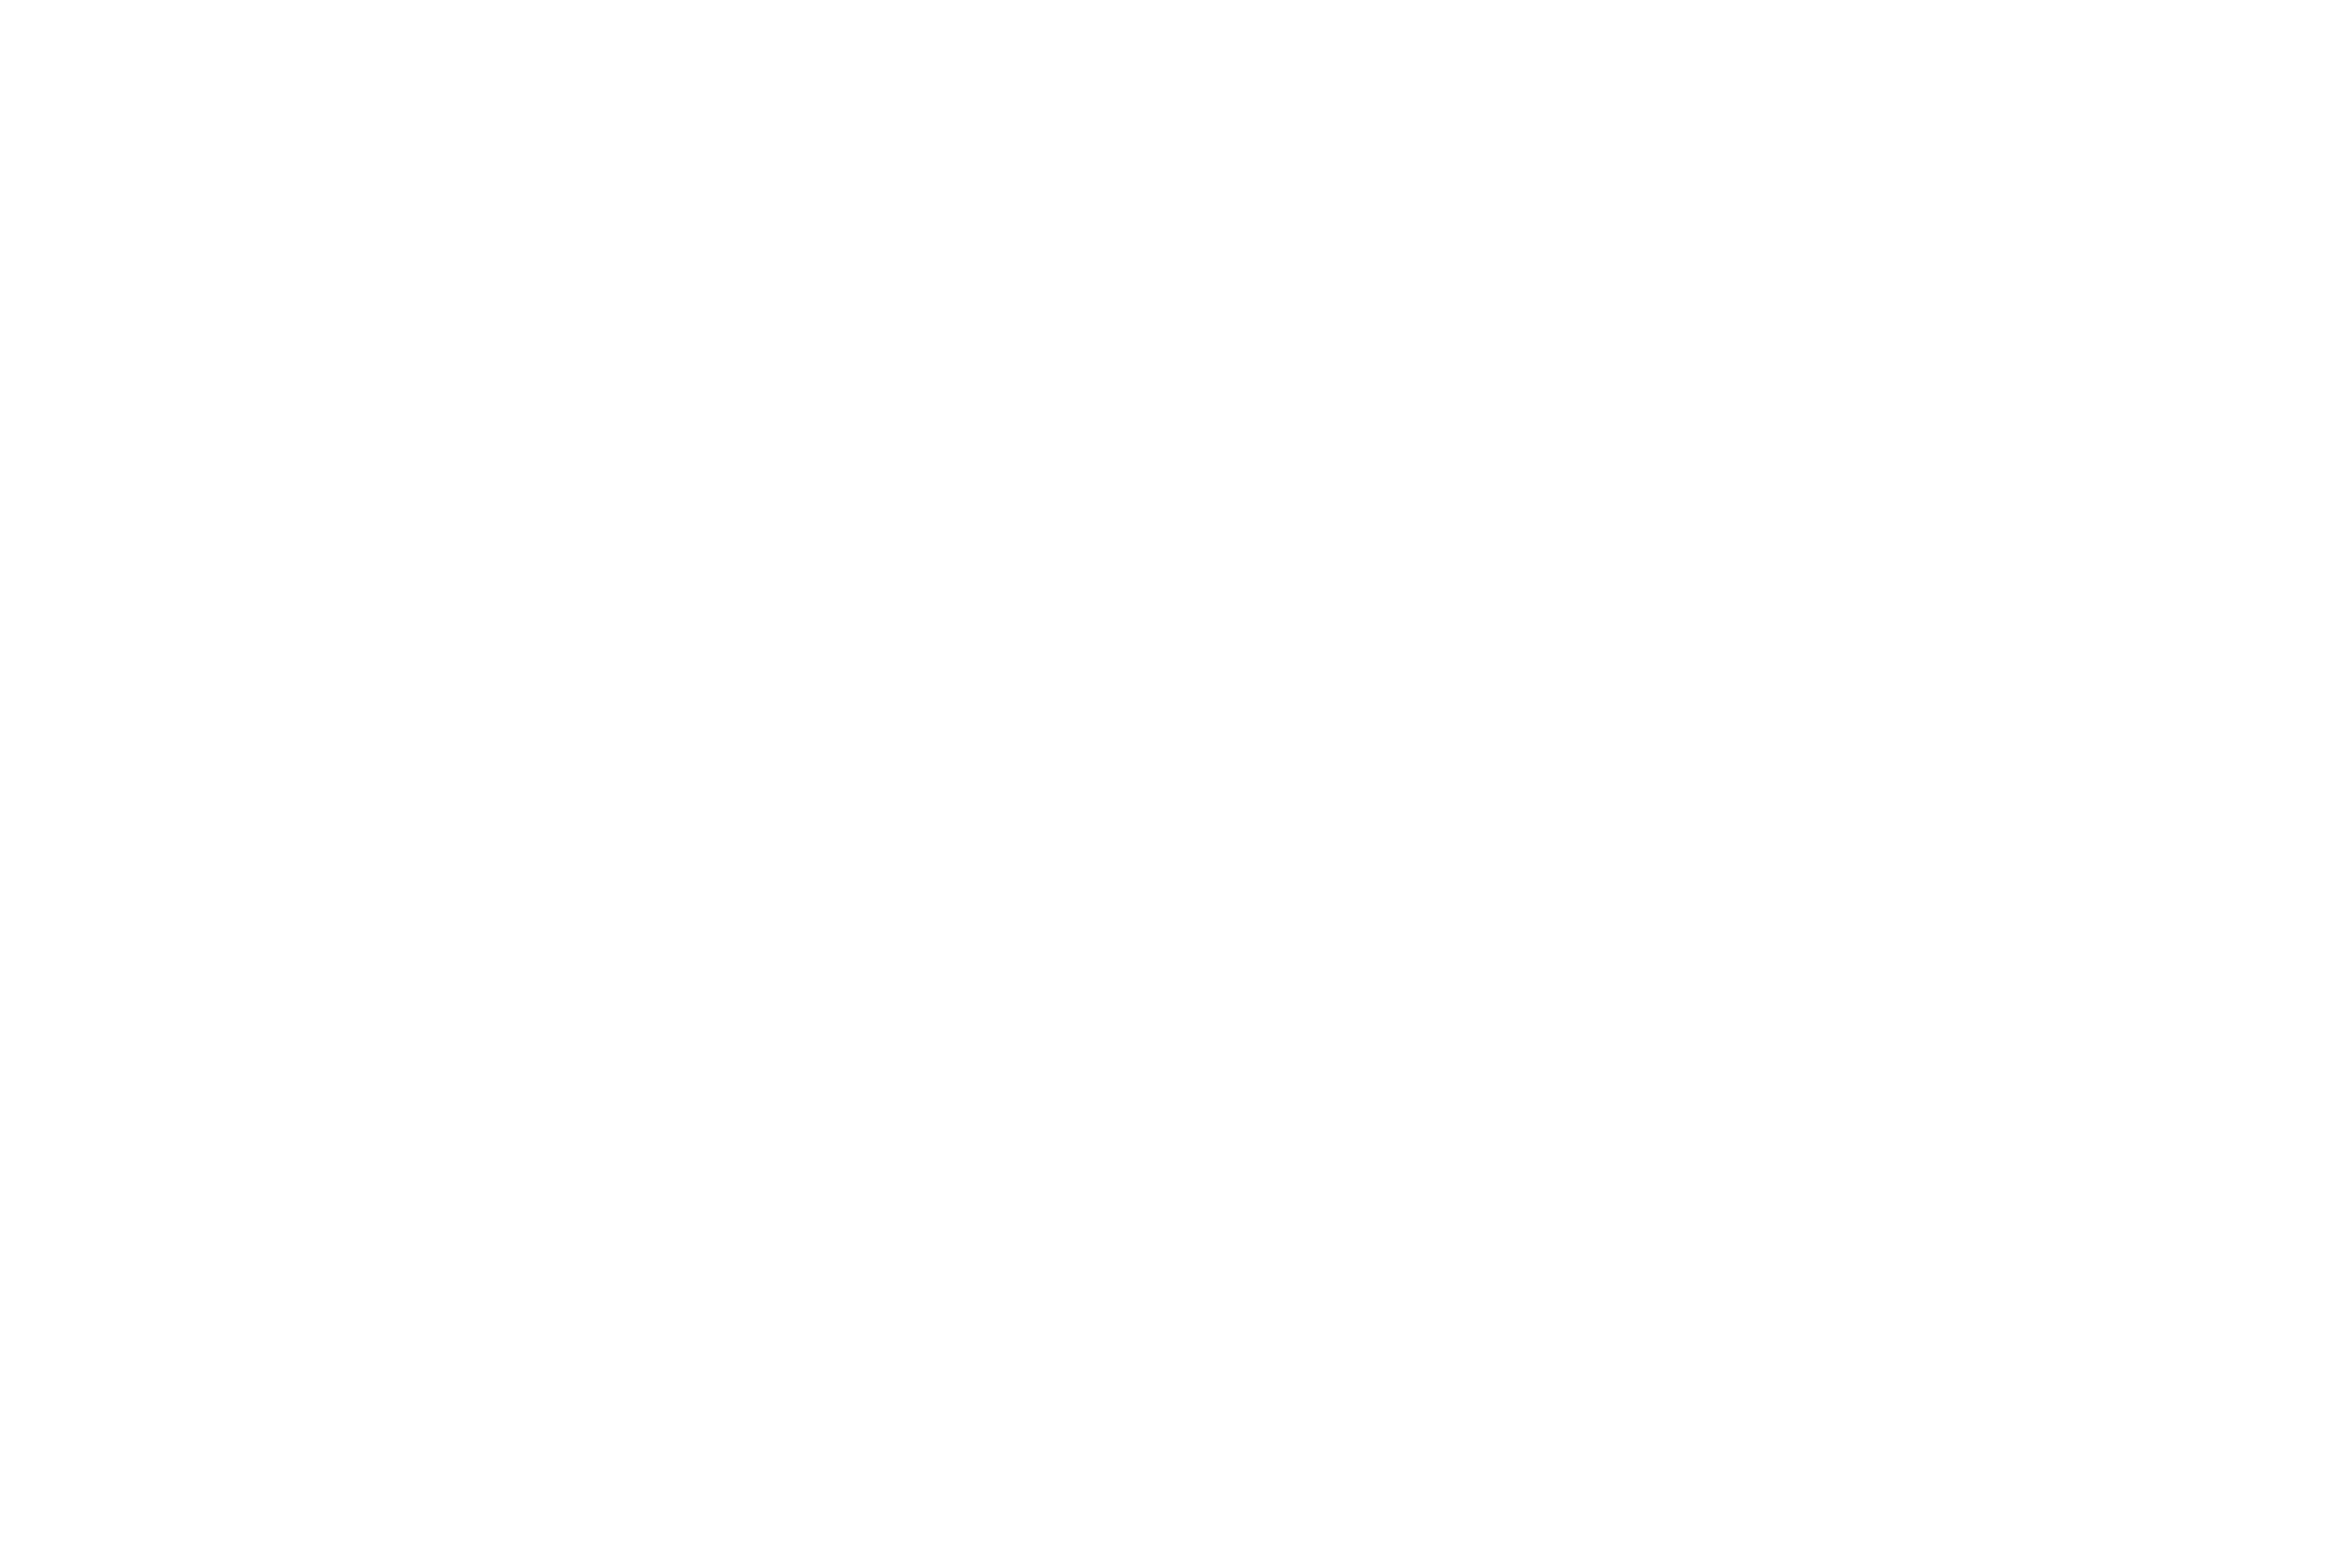 Carl Downing Photography